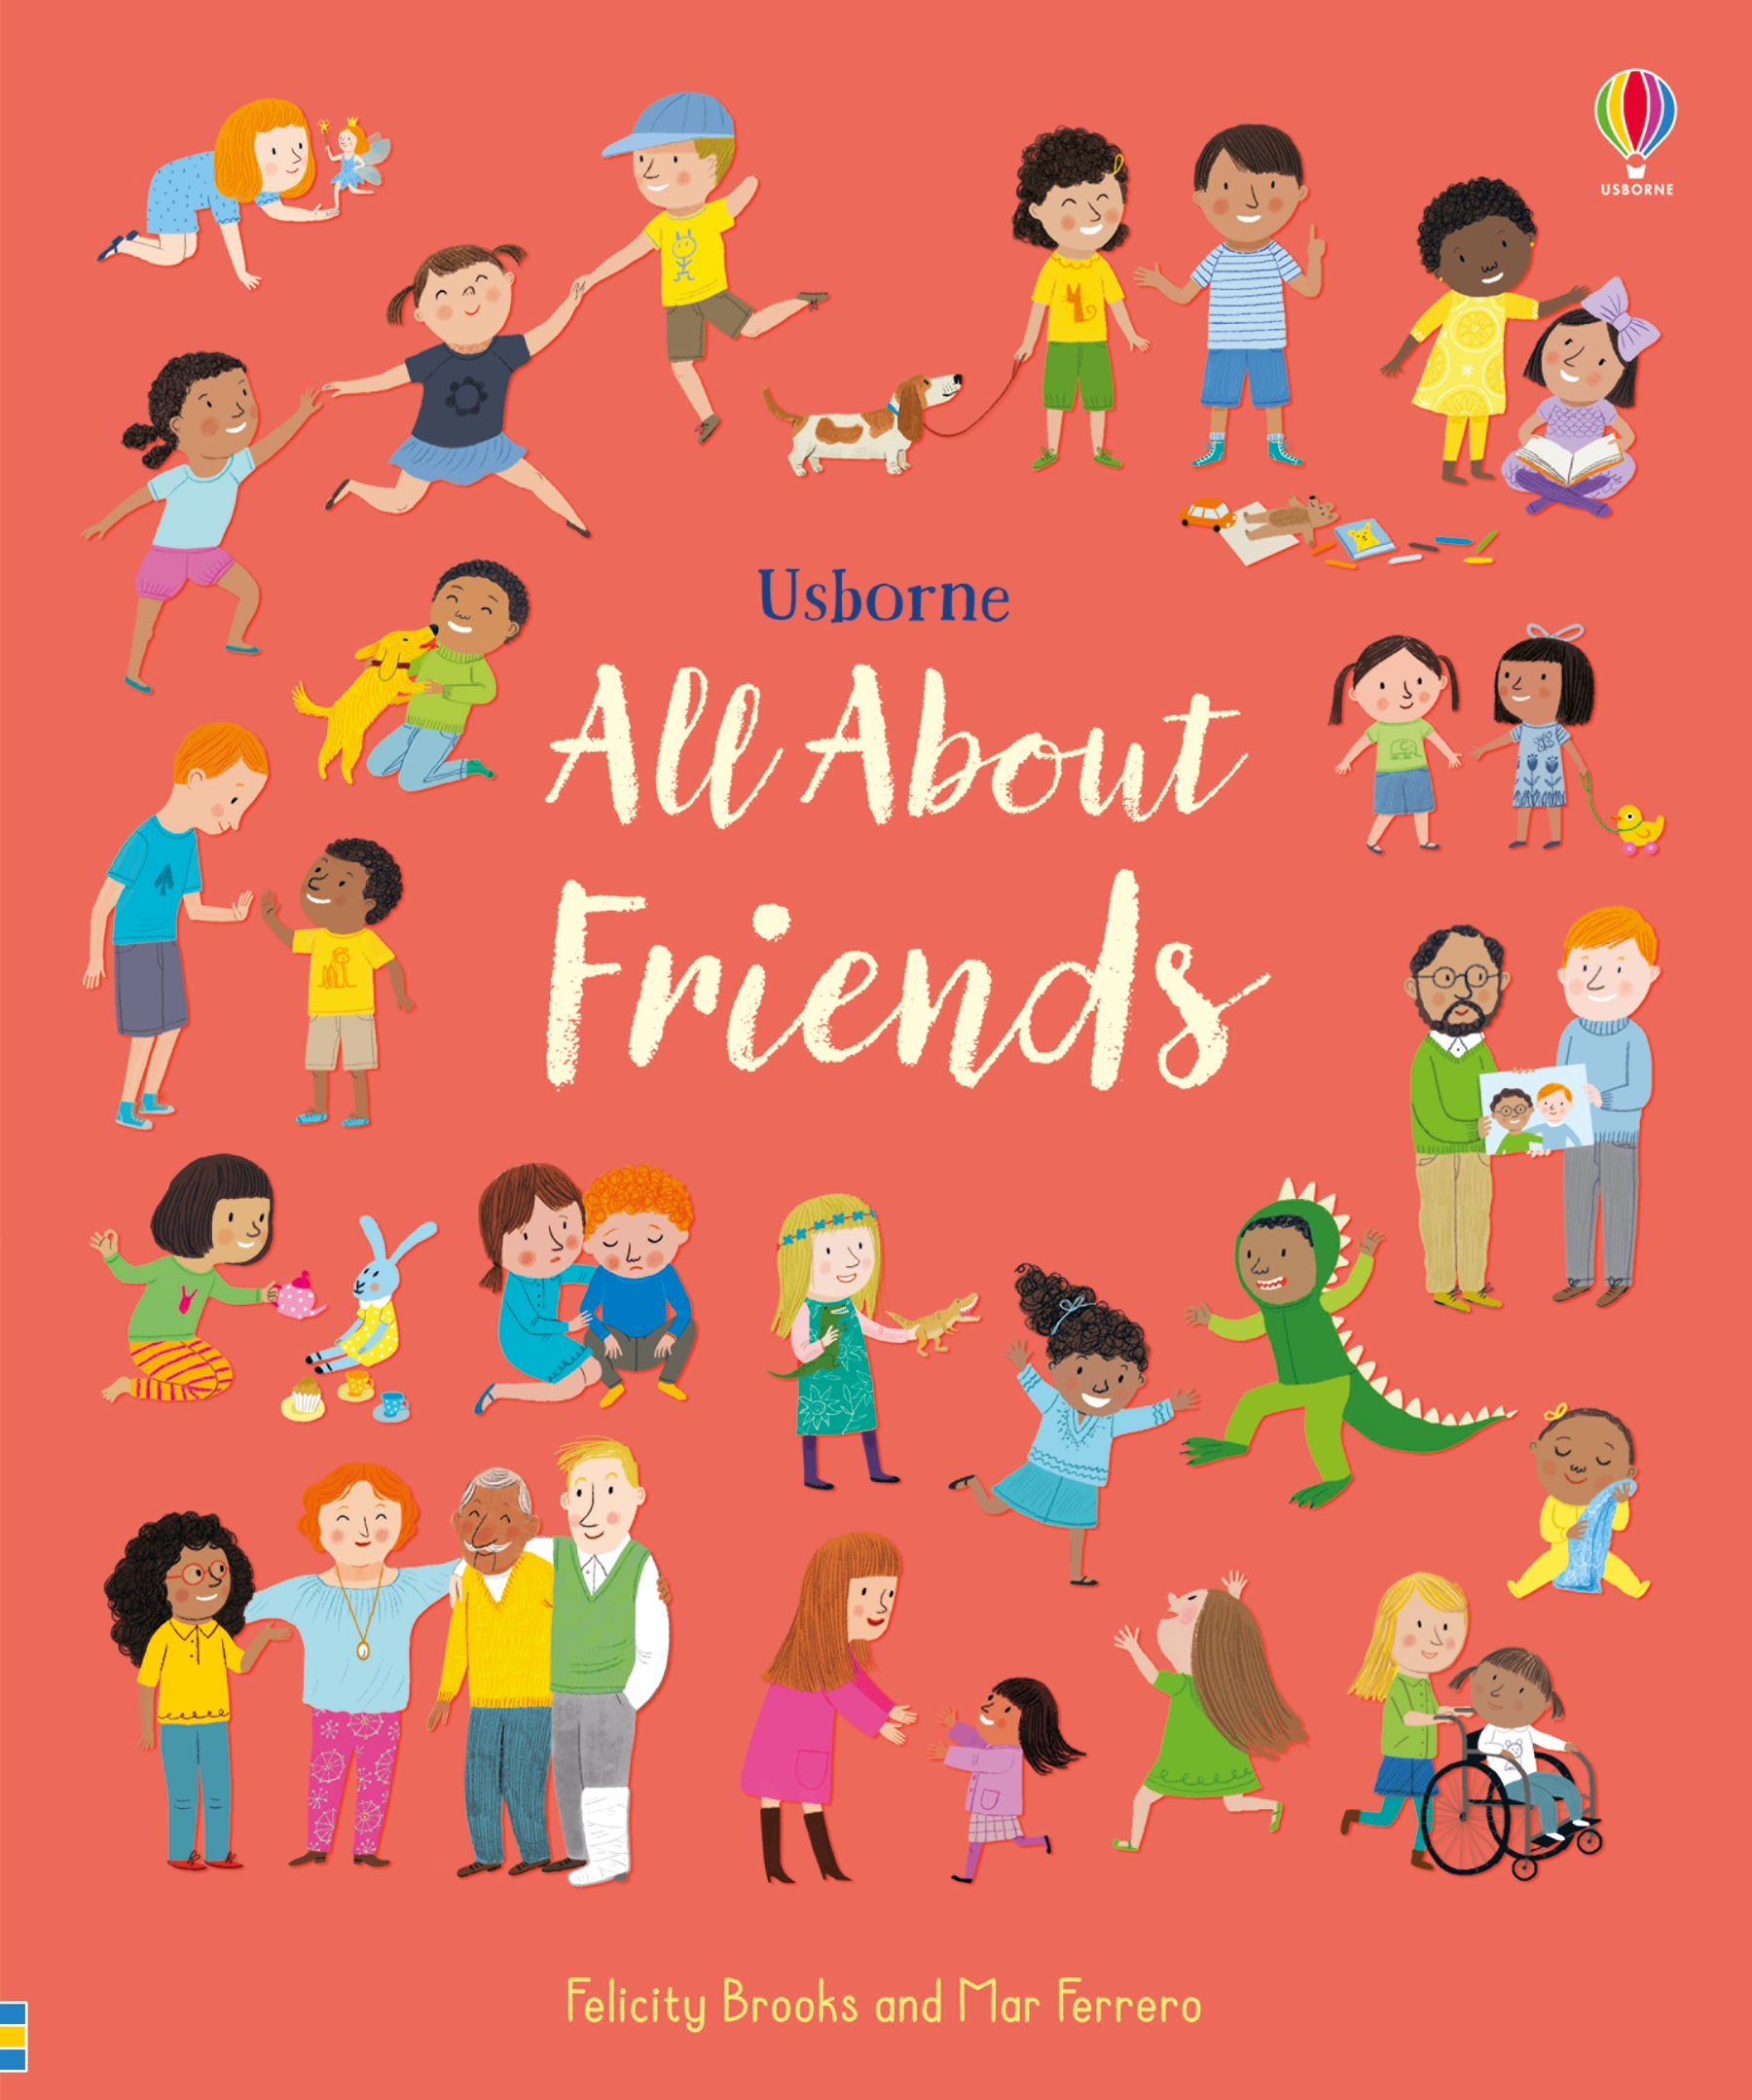 All　Curious　Usborne　About　Friends　Be